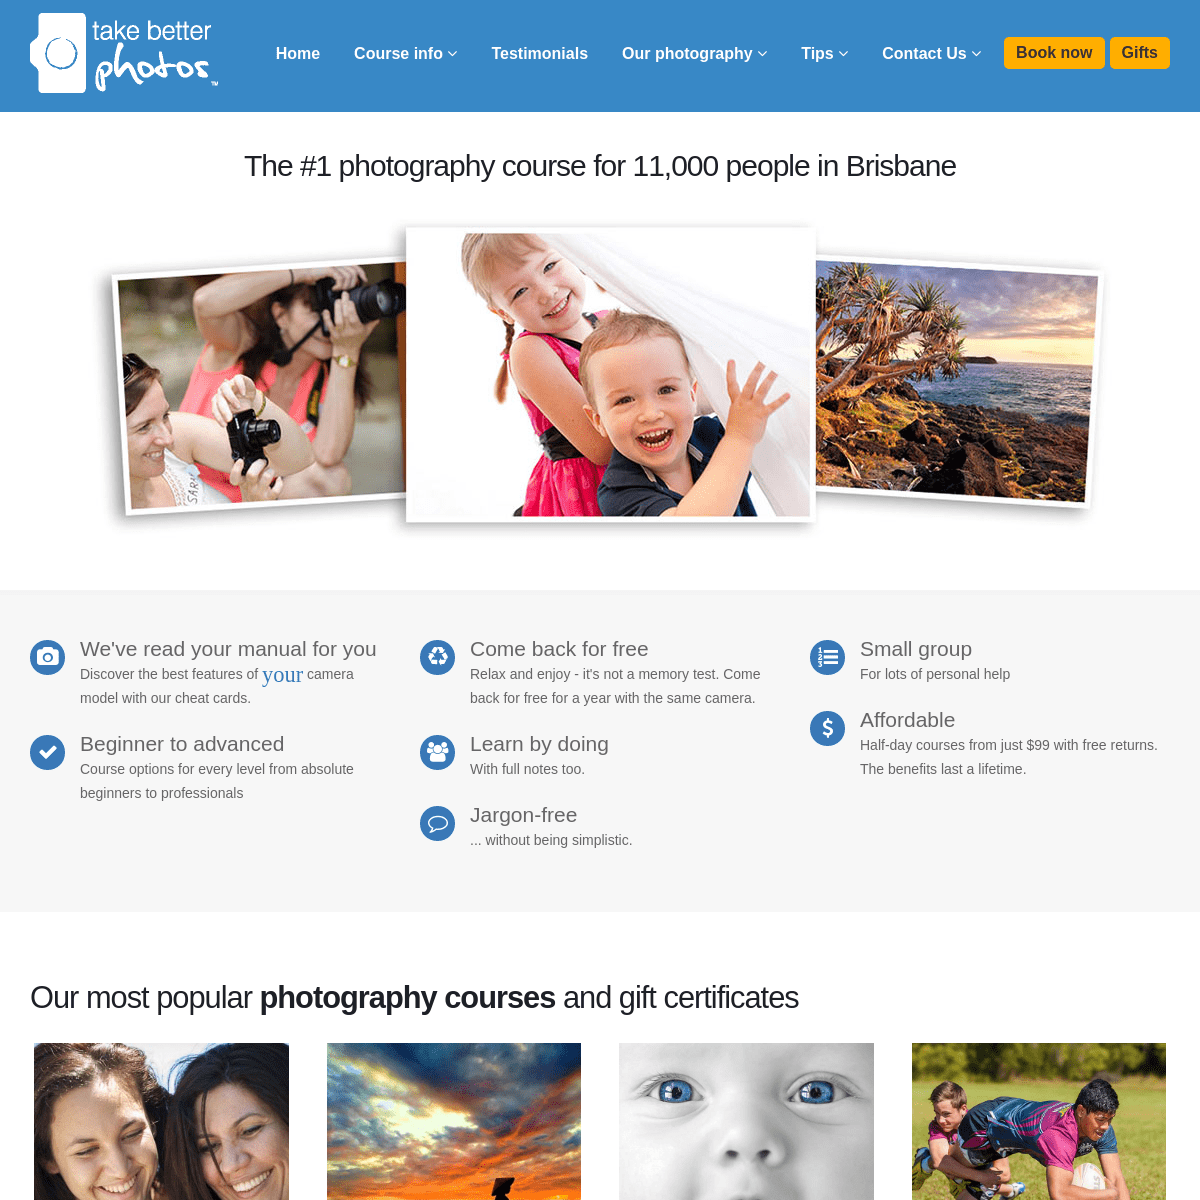 A complete backup of takebetterphotos.com.au